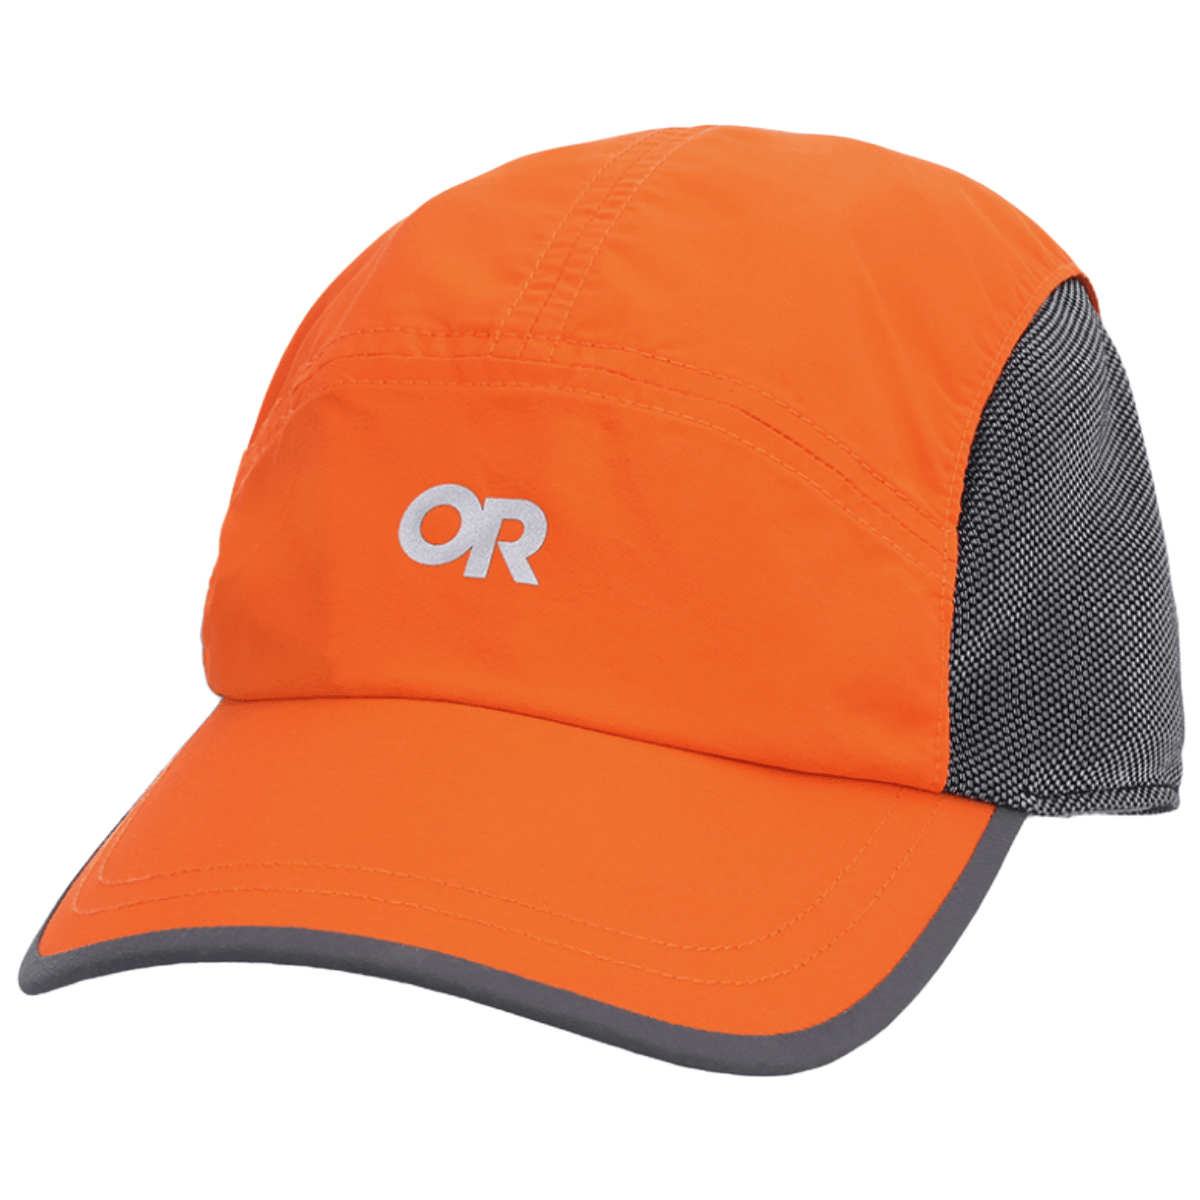 Outdoor Research Swift Cap - Youth - Bobwards.com